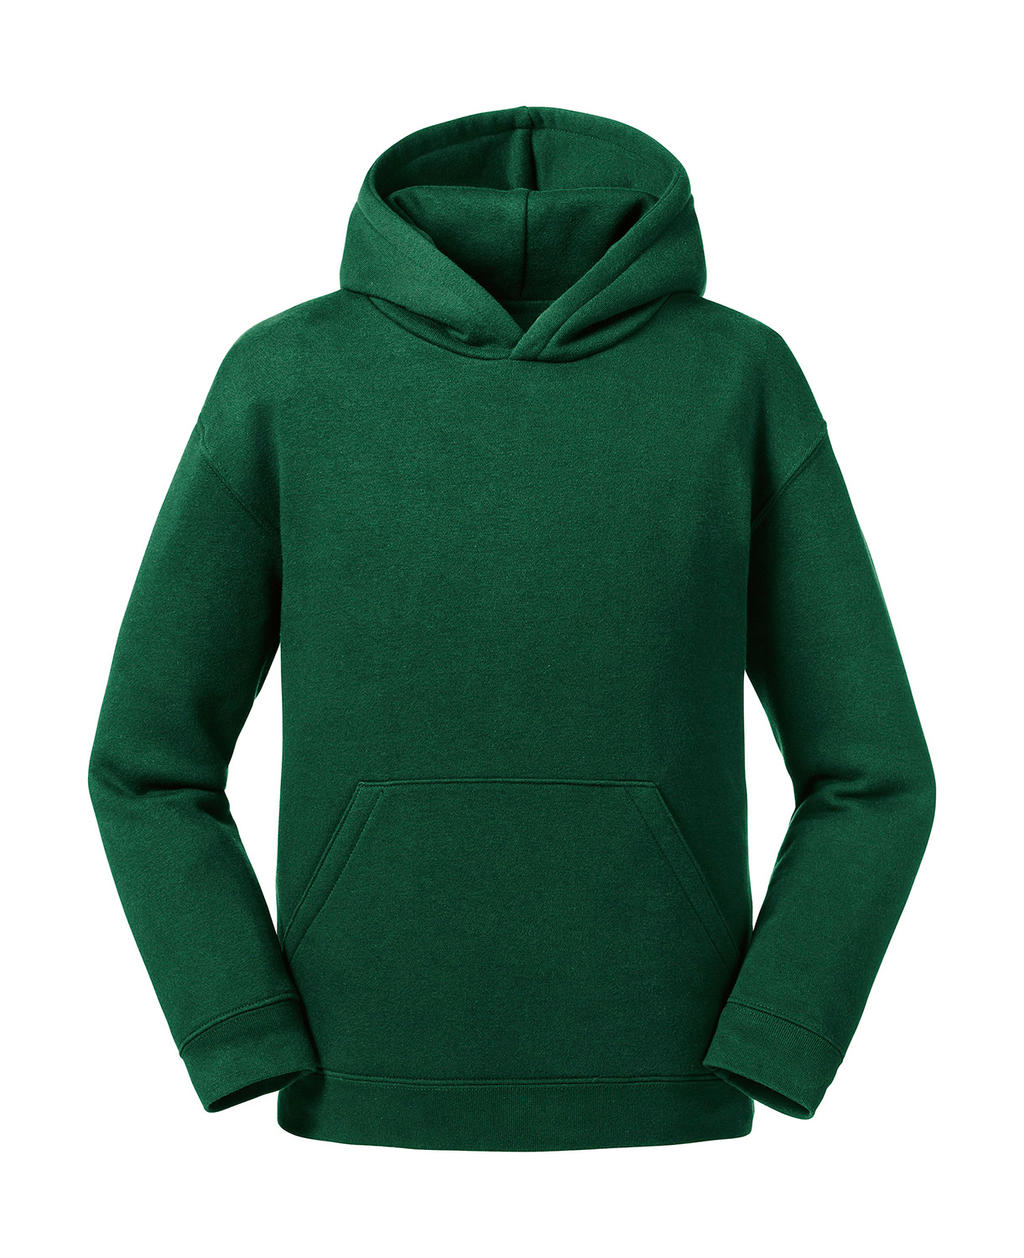  Kids Authentic Hooded Sweat in Farbe Bottle Green